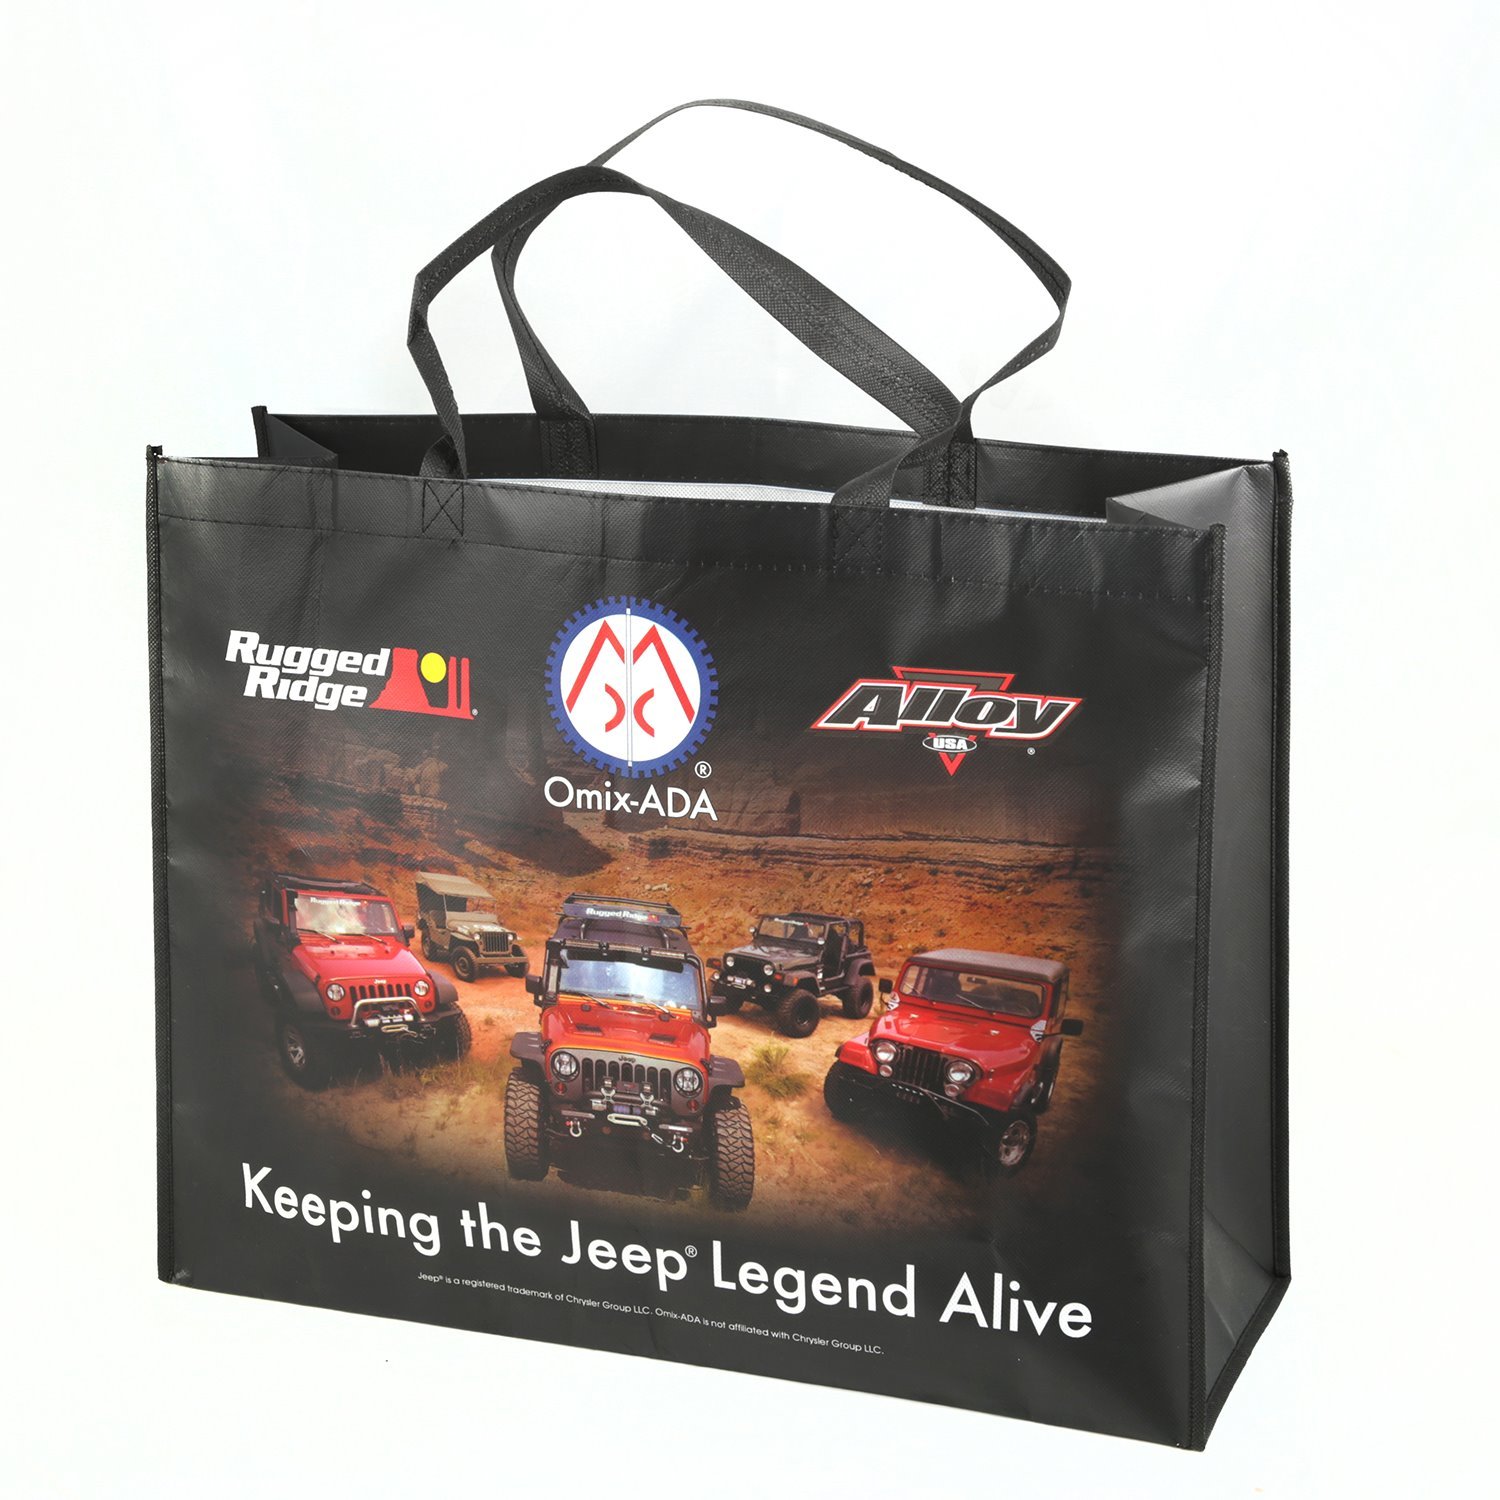 This promotional tote bag from Omix-ADA states Keeping